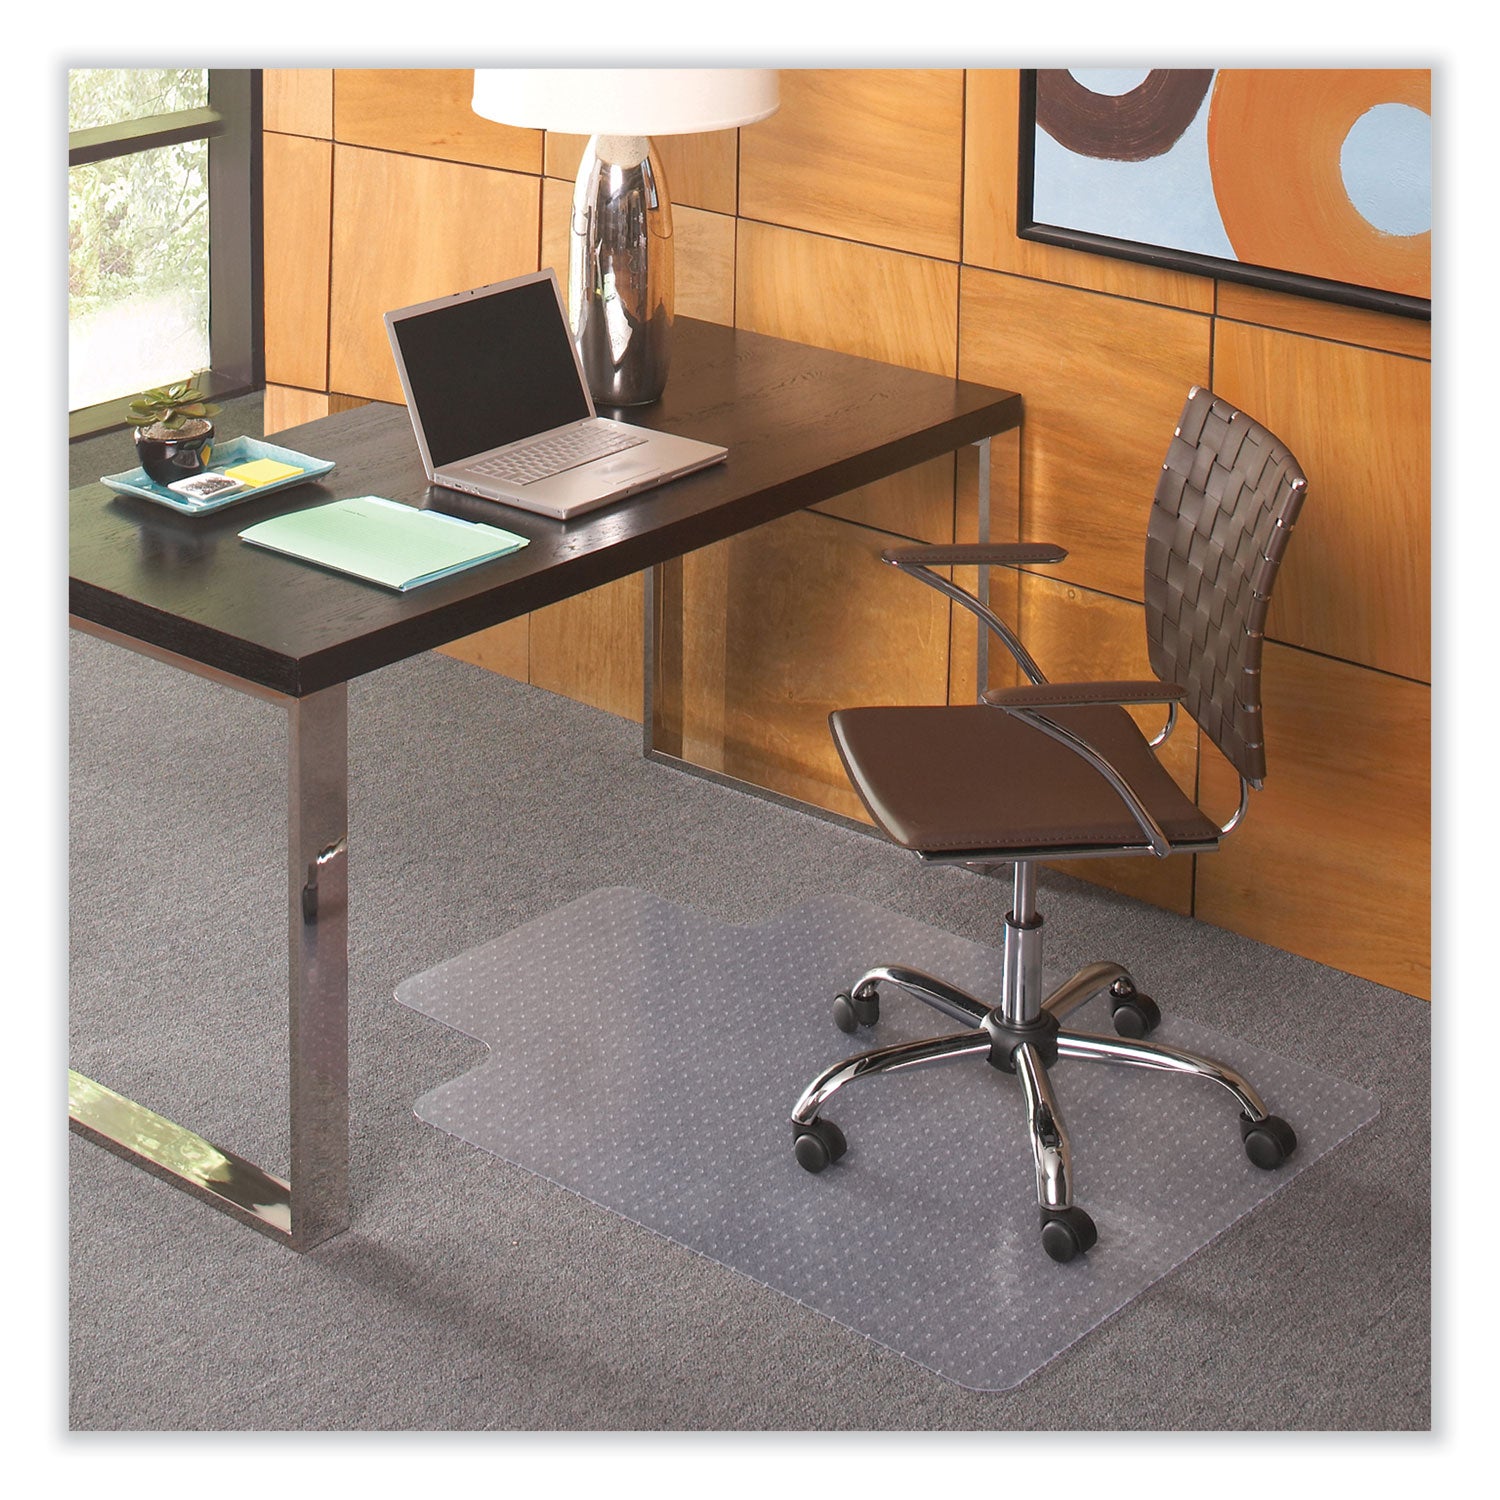 everlife-chair-mat-for-flat-pile-carpet-with-lip-36-x-48-clear-ships-in-4-6-business-days_esr121831 - 4